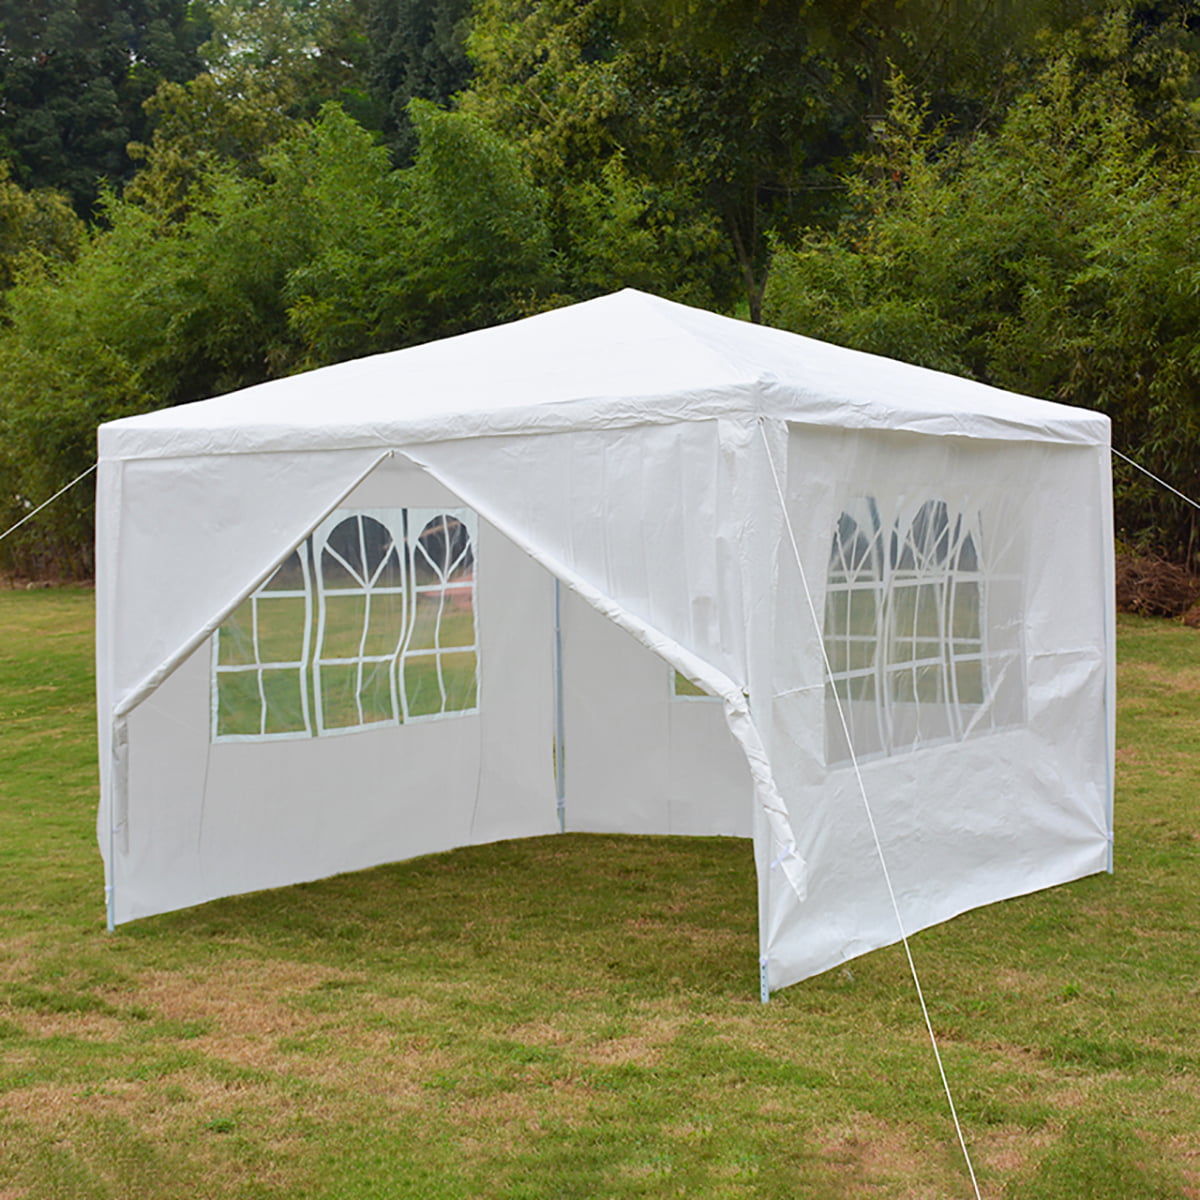 3mx3m Gazebo Marquee Party Tent w//Sides Waterproof Outdoor Garden Canopy White